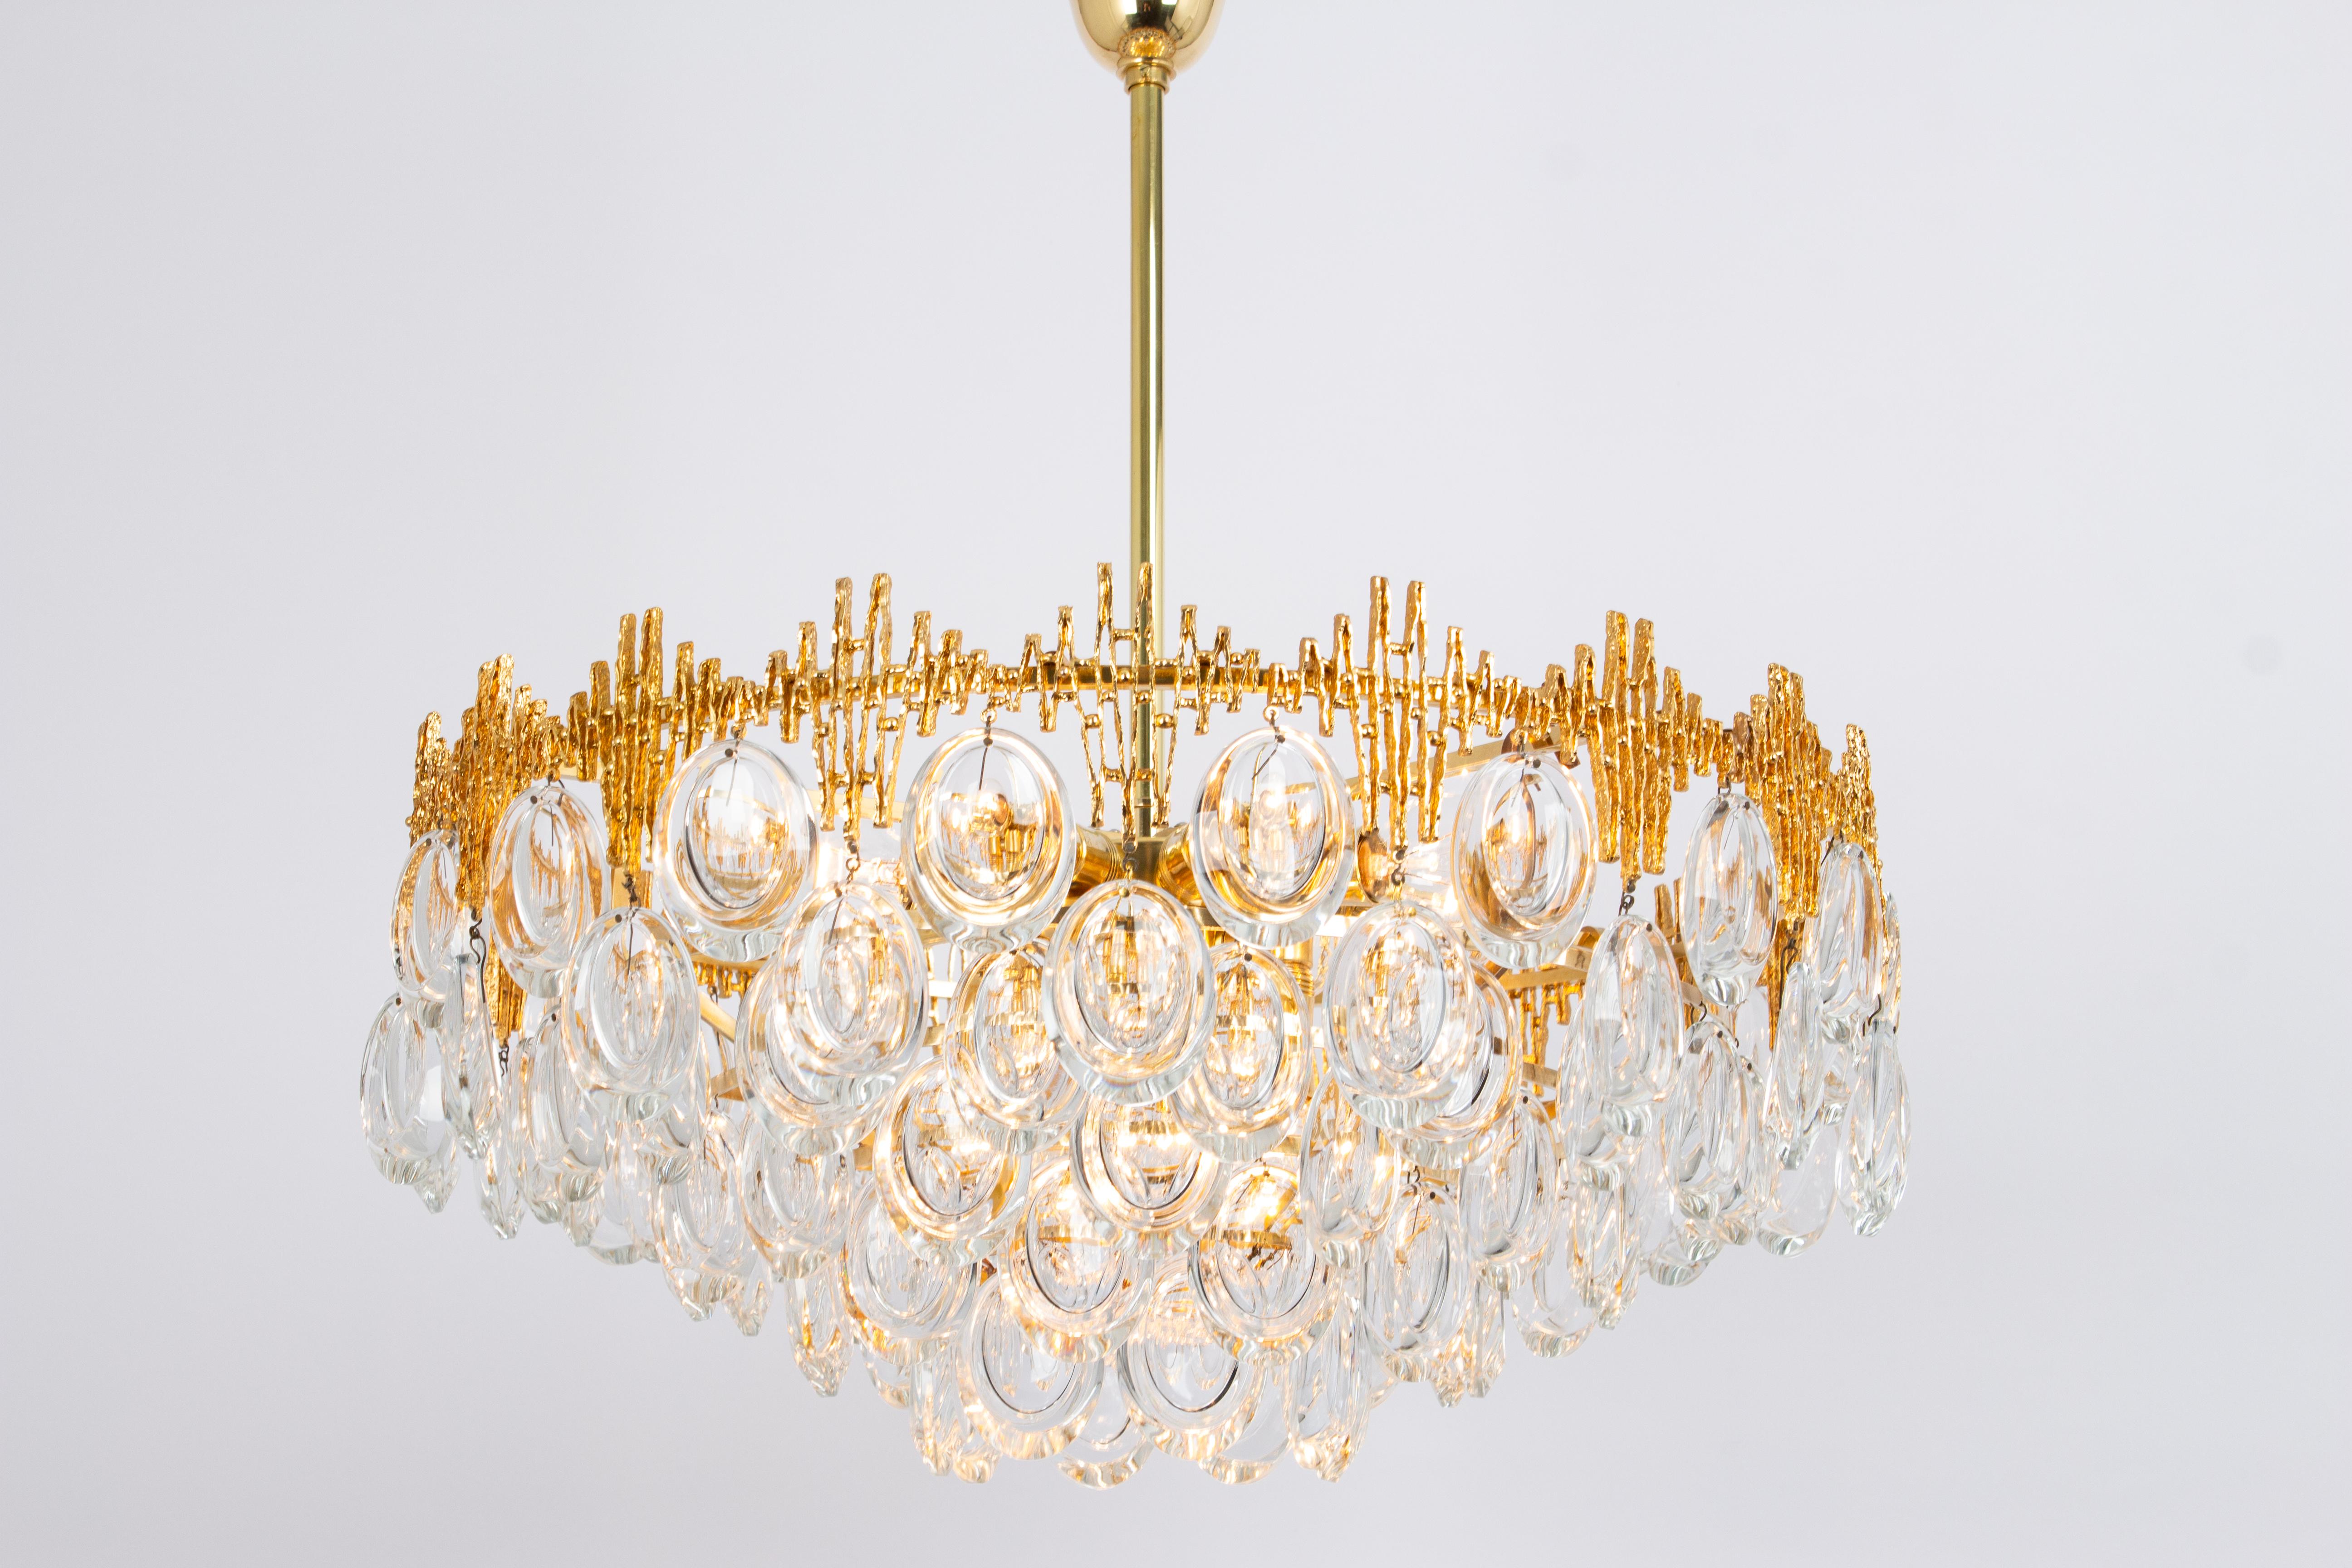 Stunning Large Brass and Crystal Chandelier, by Palwa, Germany, 1970s For Sale 4